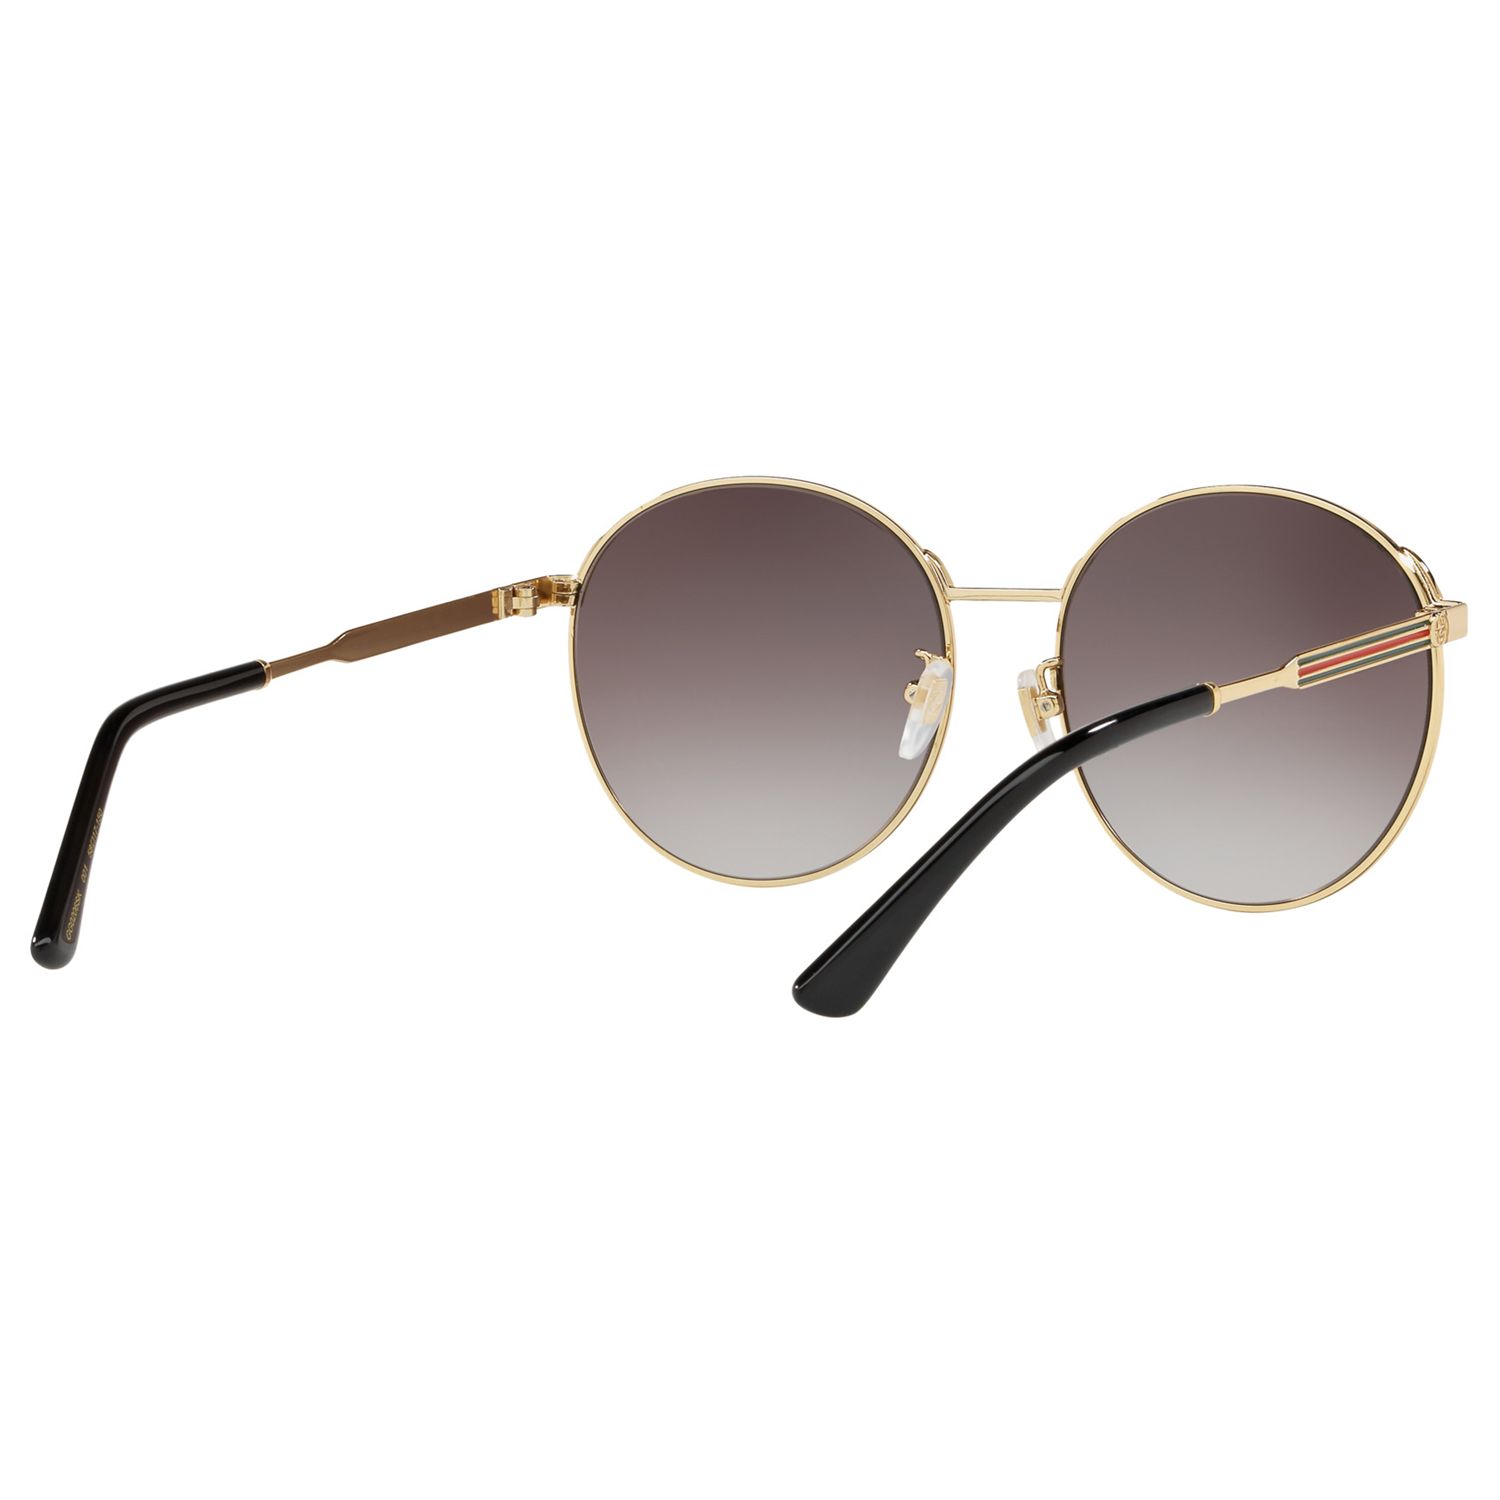 Gucci GG0206SK Oval Sunglasses, Gold/Grey Gradient at John Lewis & Partners